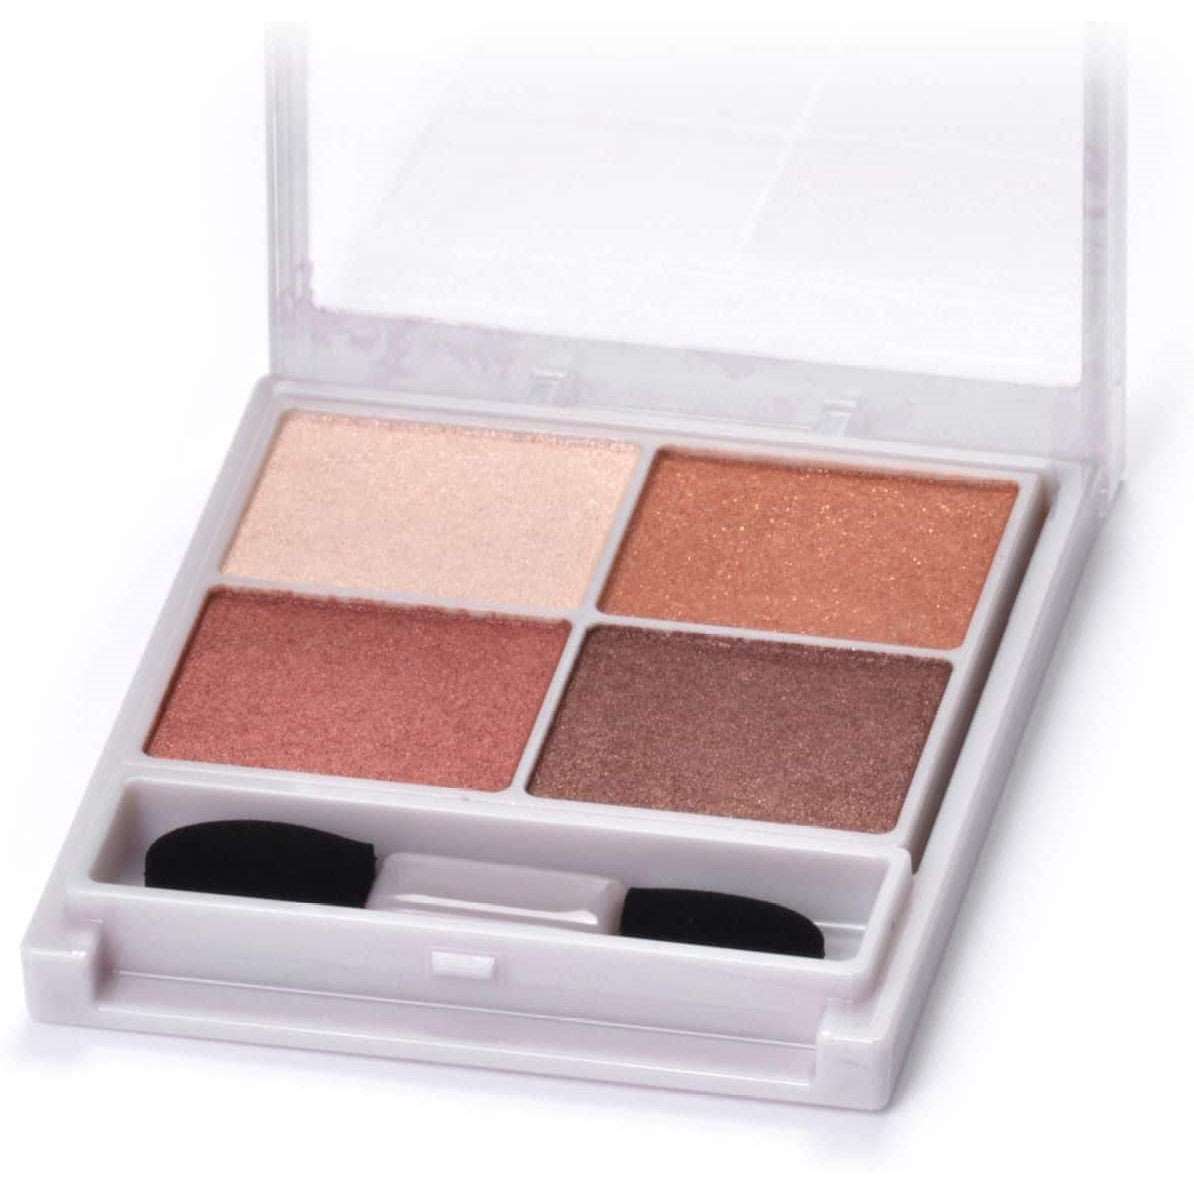 Canmake Silky Souffle Eyes Eyeshadow (Made in Japan)